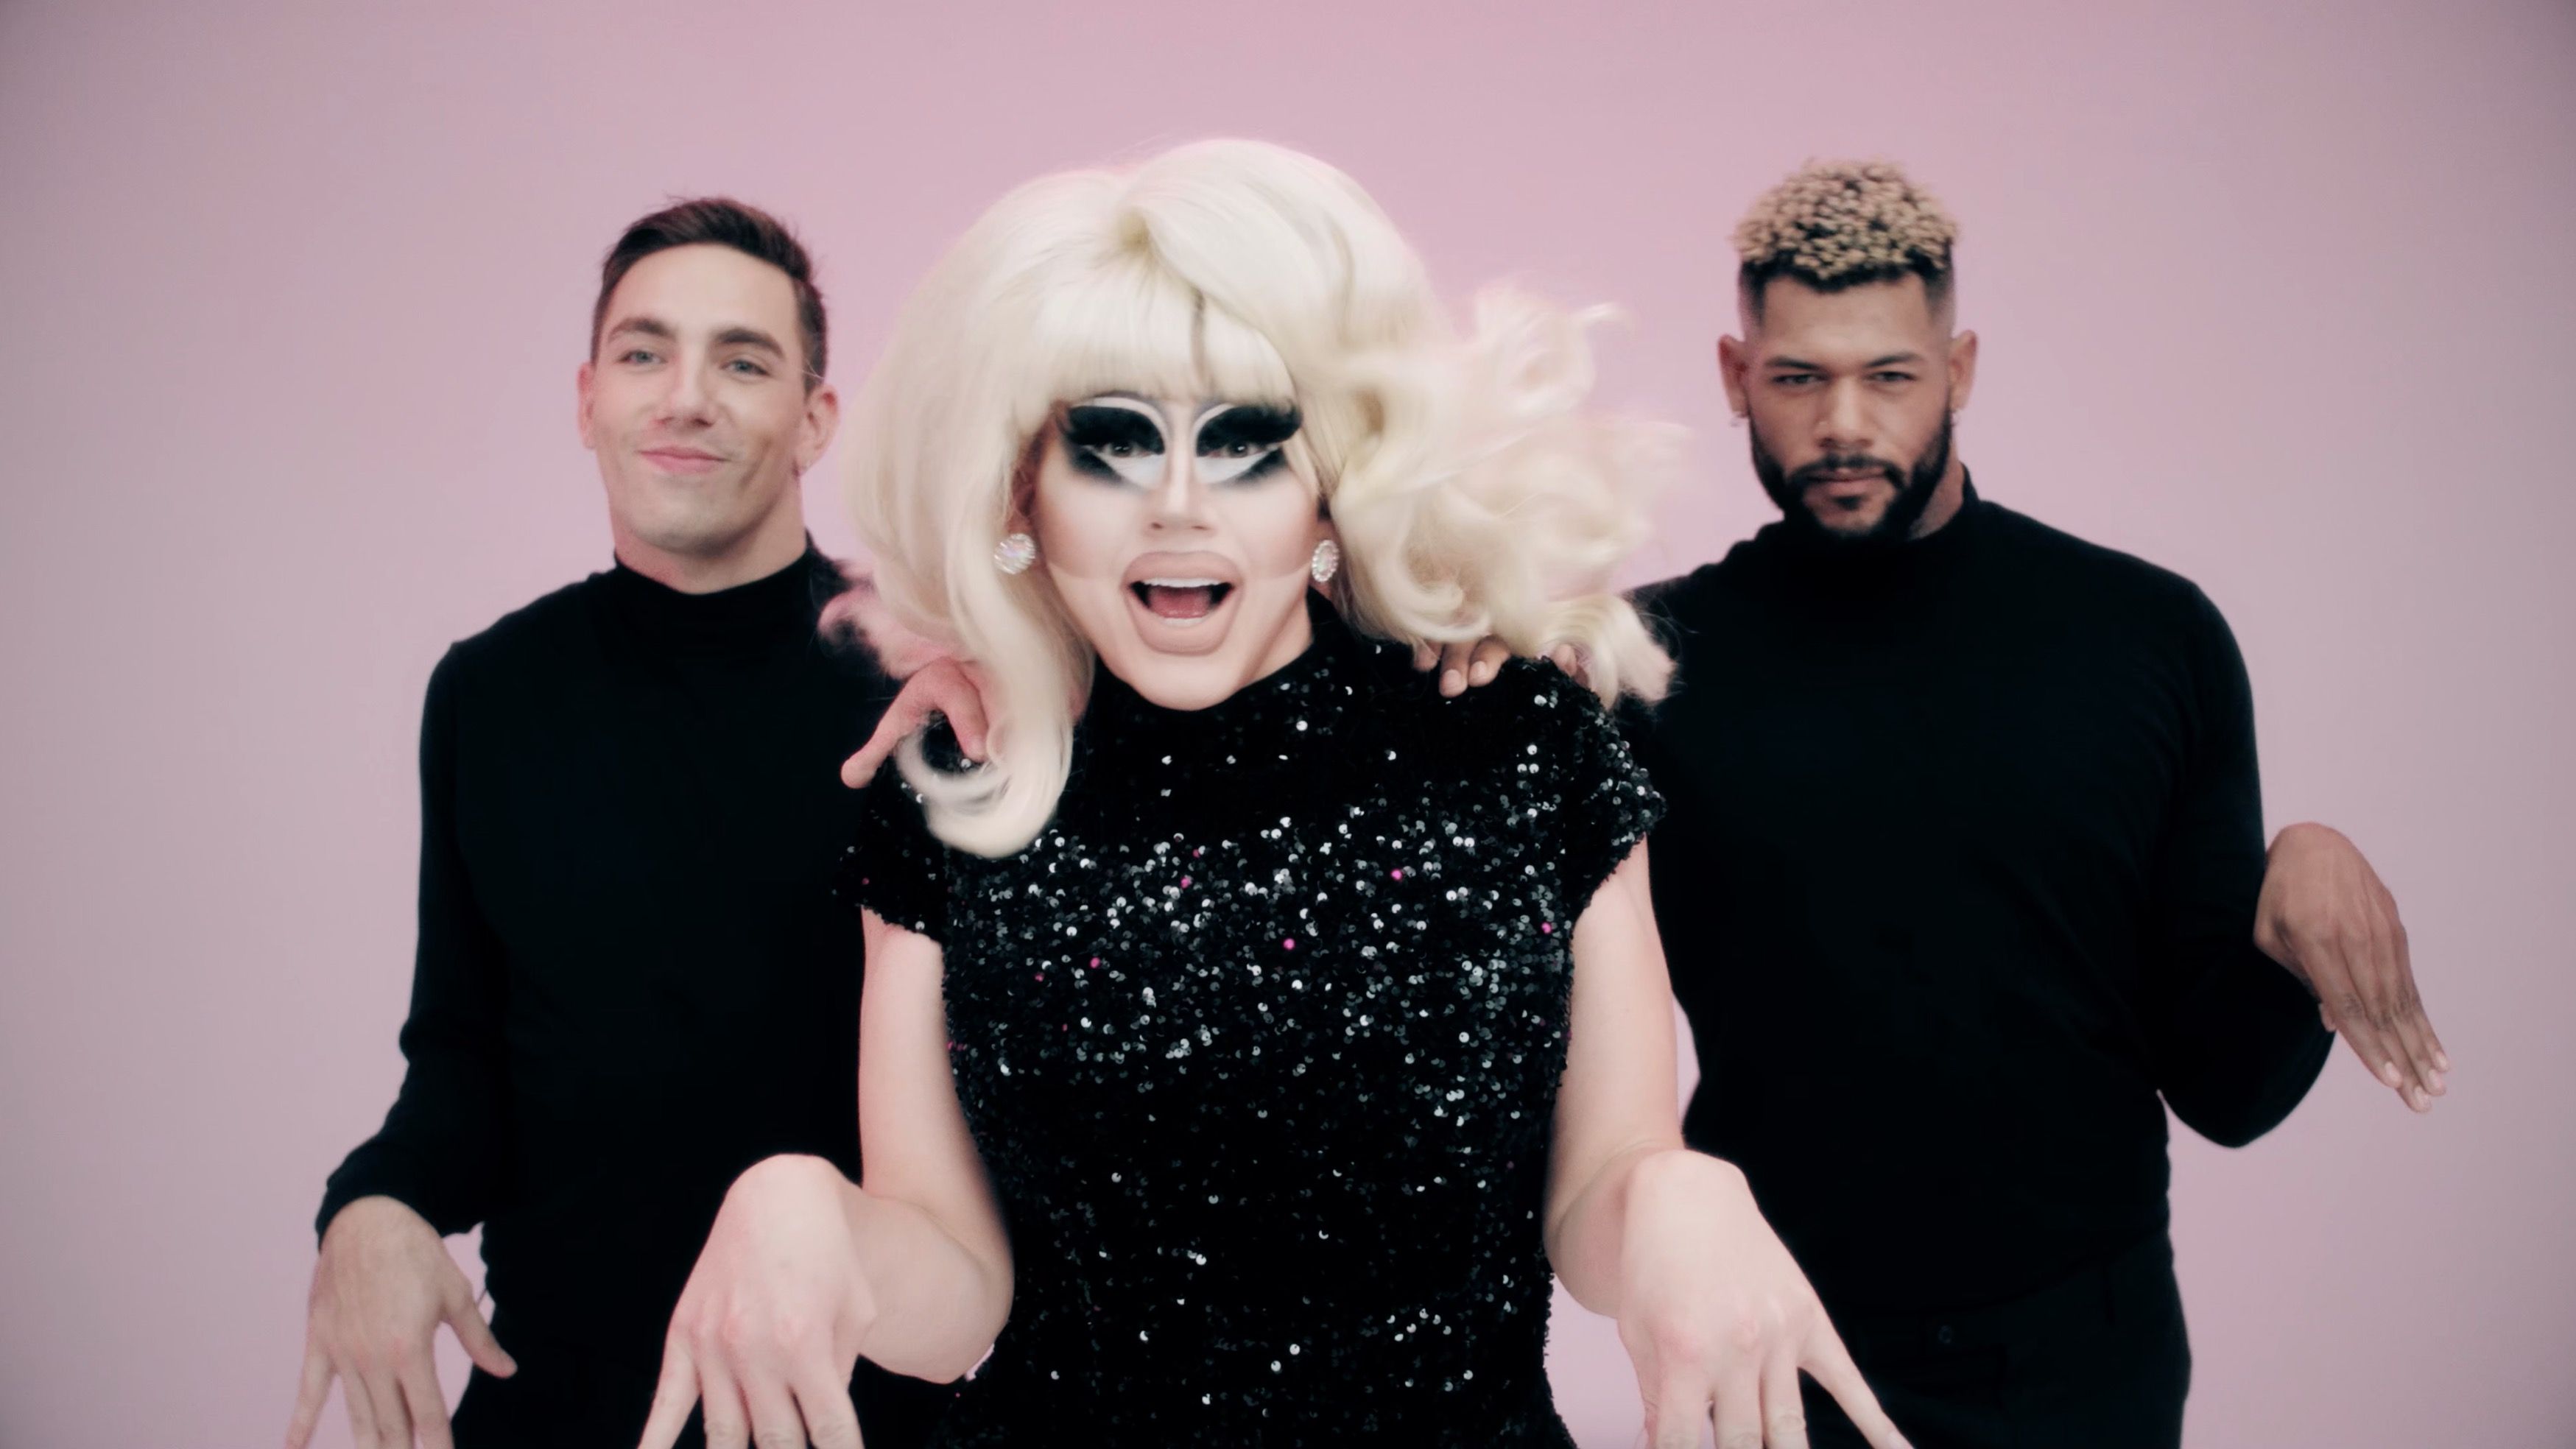 The pop culture phenomenon that is RuPaul's Drag Race, explained - Vox